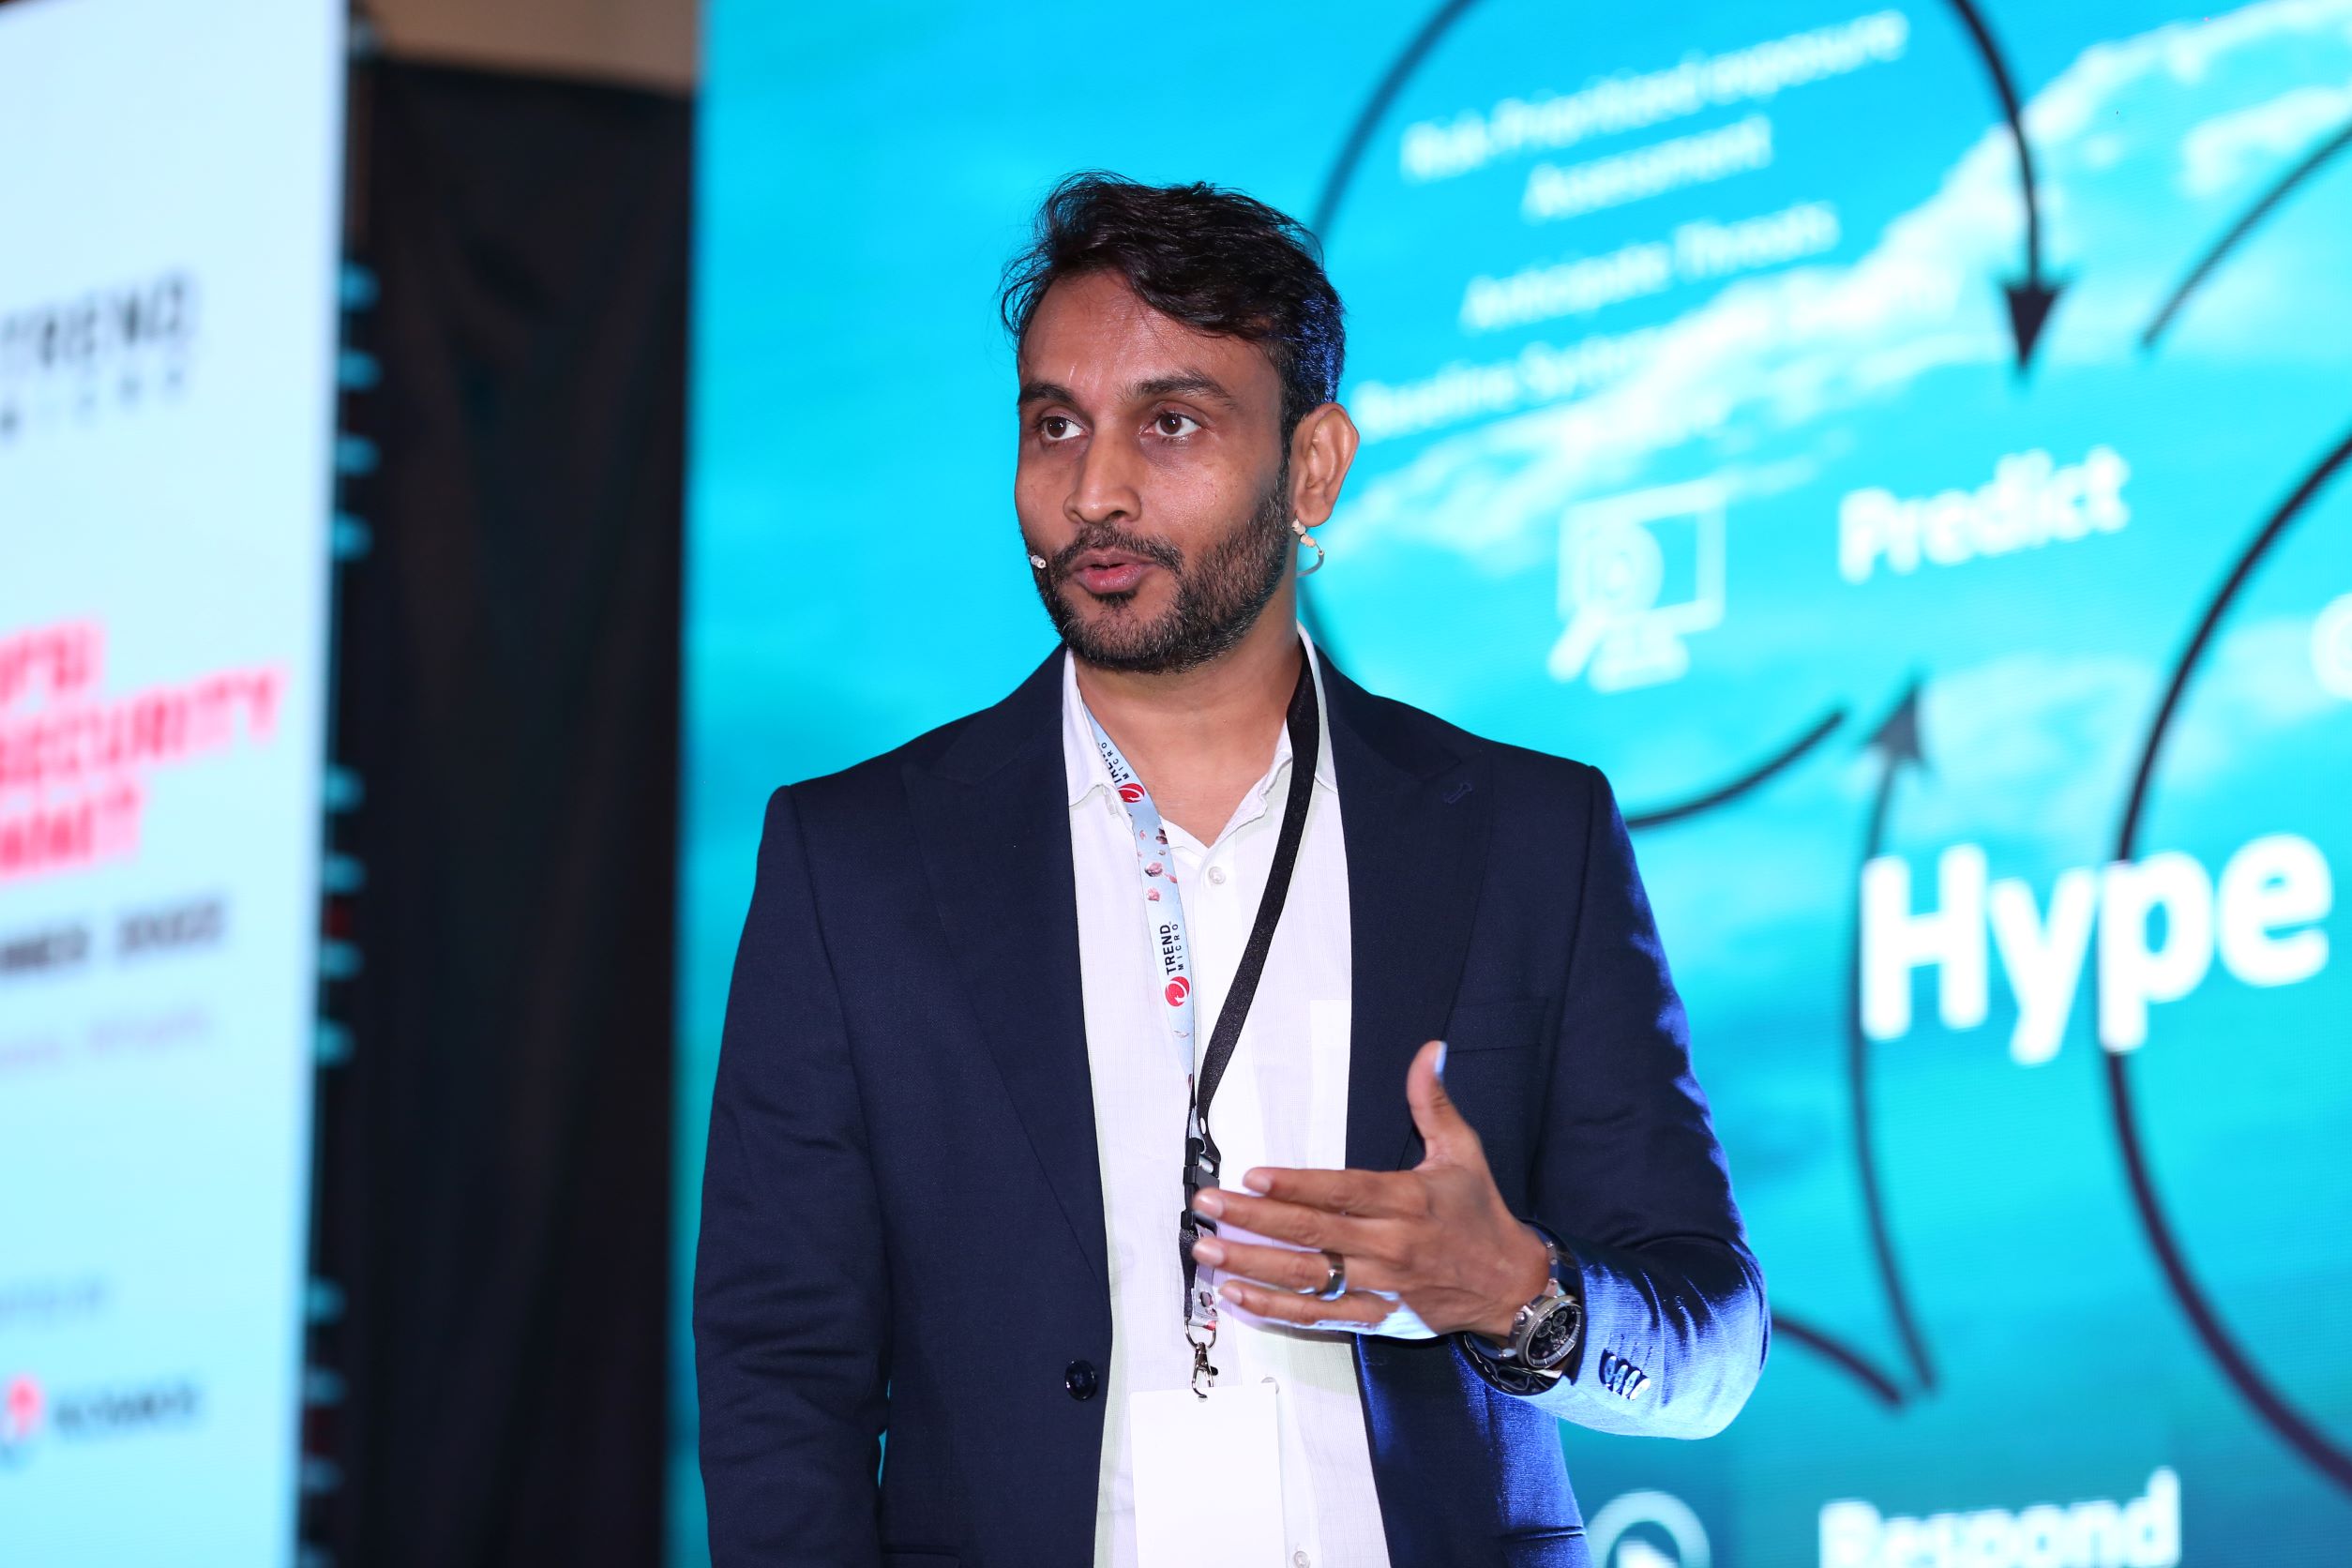 Nilesh Jain, Trend Micro VP SEA & India discussed about reimagining Cybersecurity for the Future of IT and BFSI Business Transformation during the BFSI Cybersecurity Summit Philippines 2022.